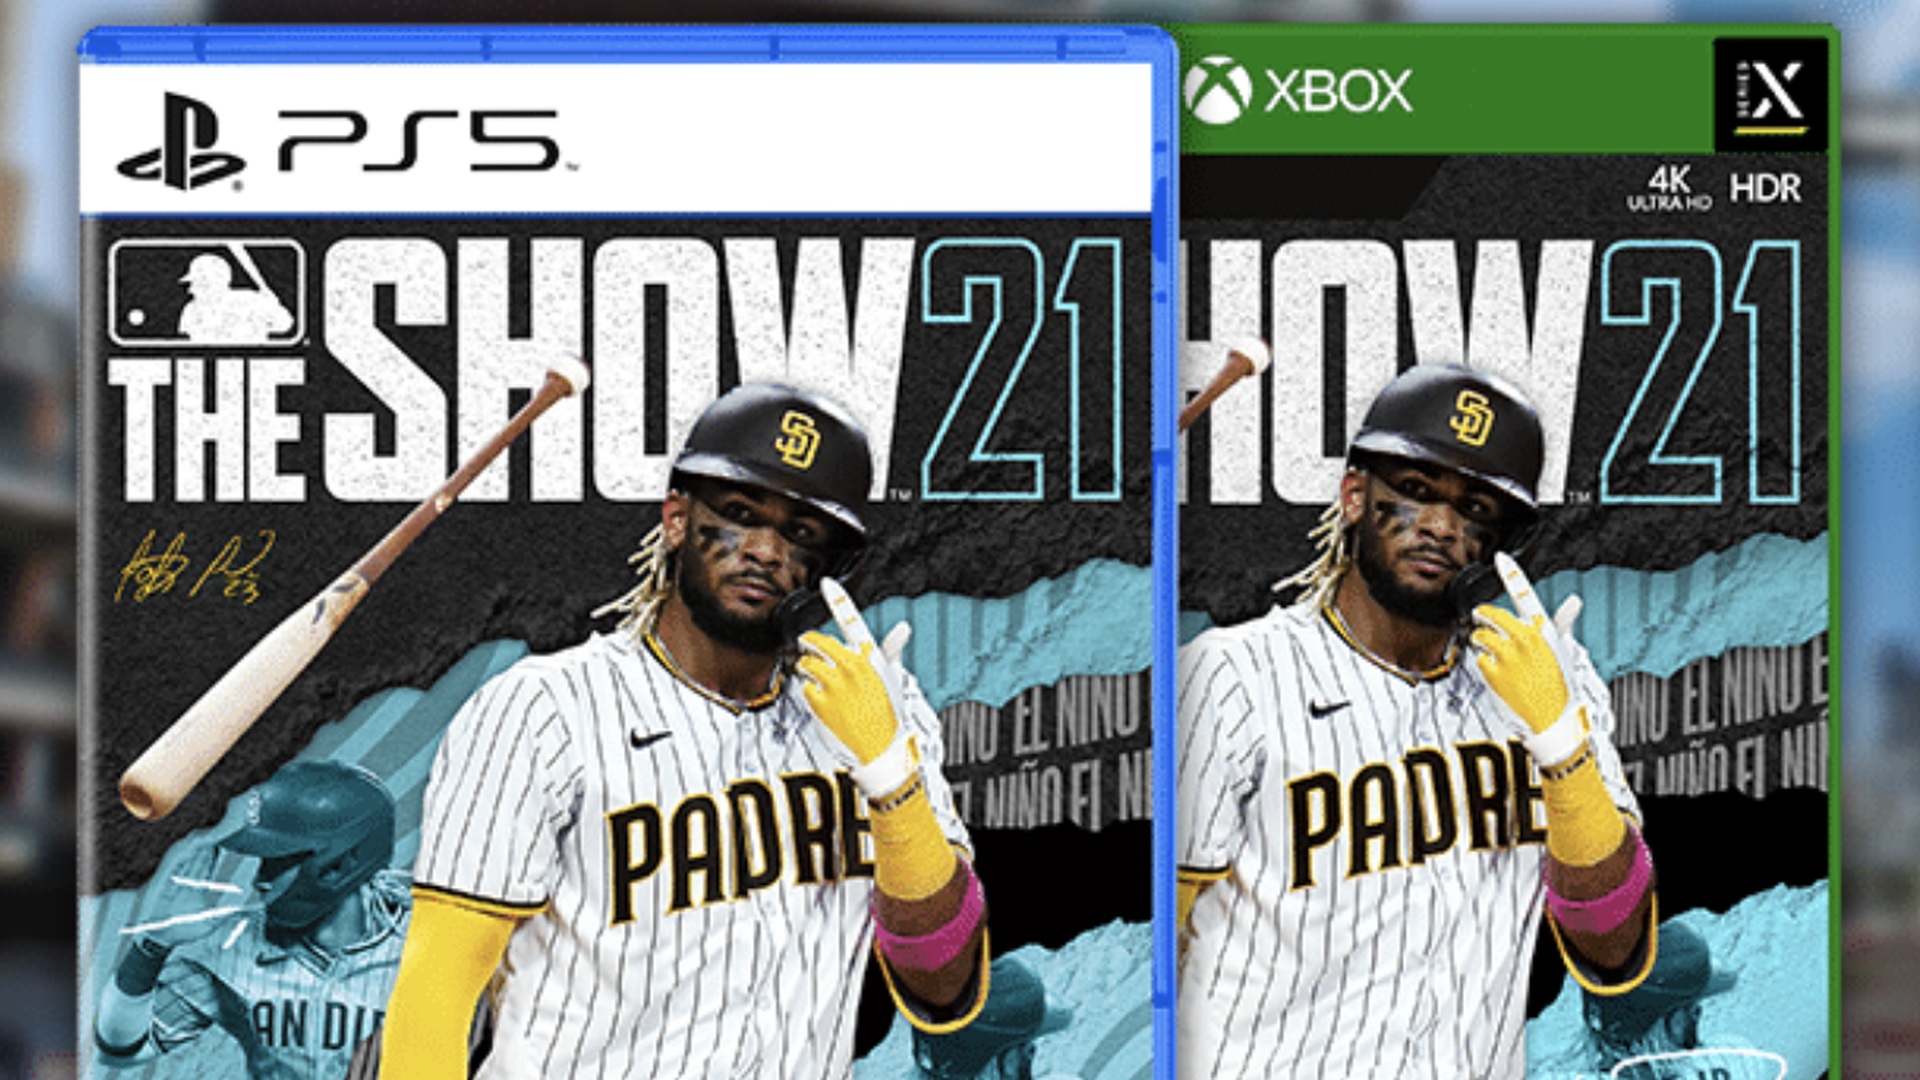 Covers of the PS5 and Xbox versions of MLB The Show 21